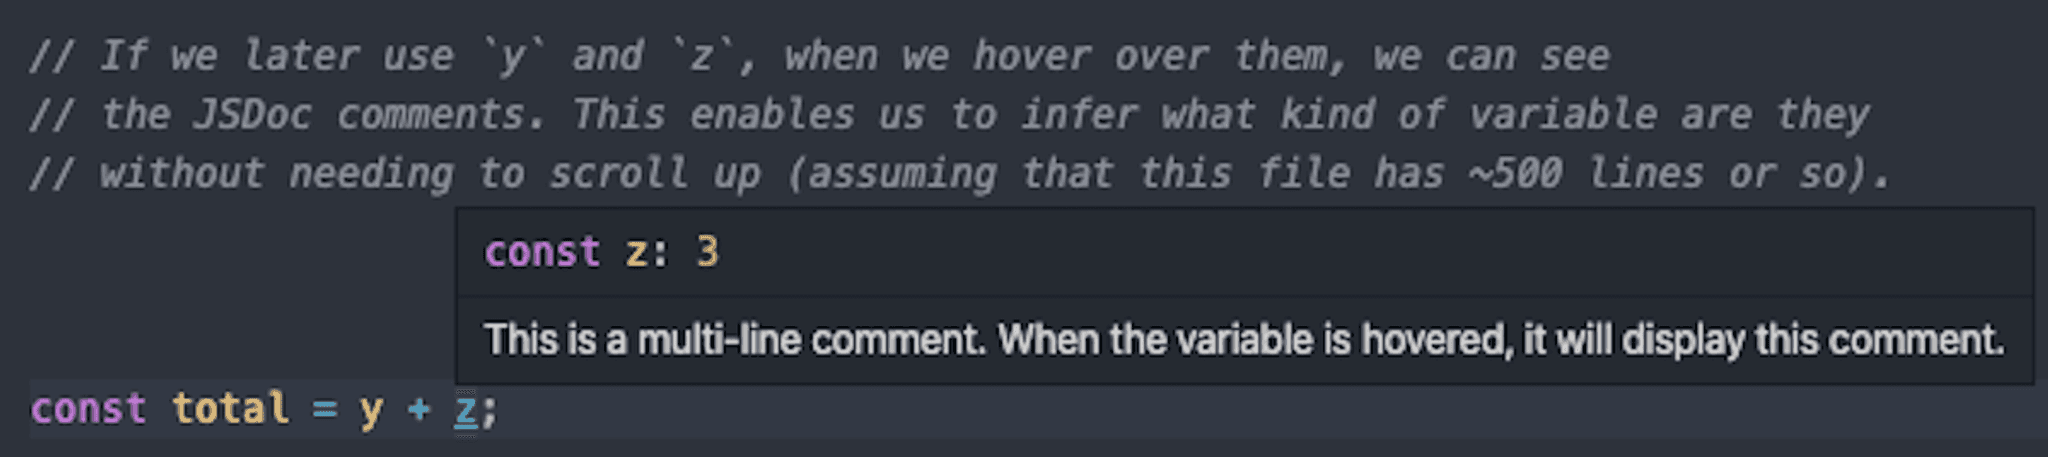 Modern IDEs are capable of showing JSDoc comments on a variable when hovered.